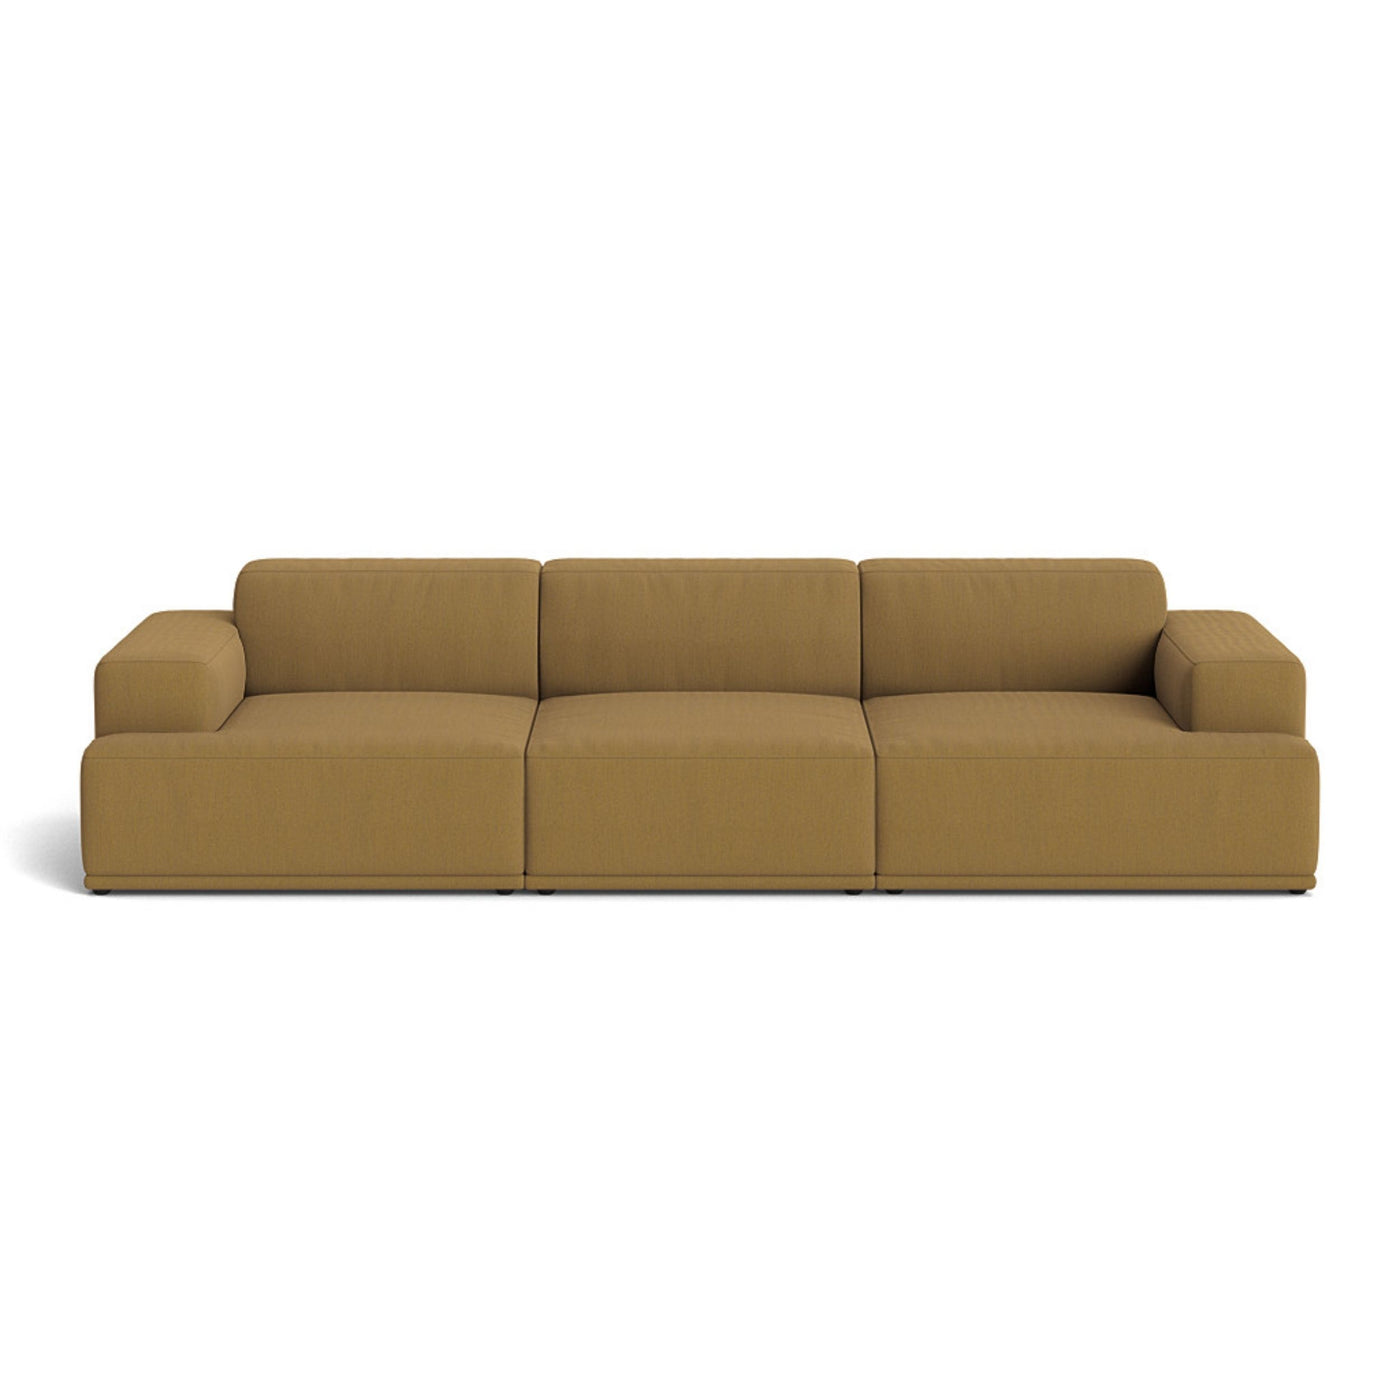 Muuto Connect Soft Modular 3 Seater Sofa, configuration 1. Made-to-order from someday designs. #colour_re-wool-448